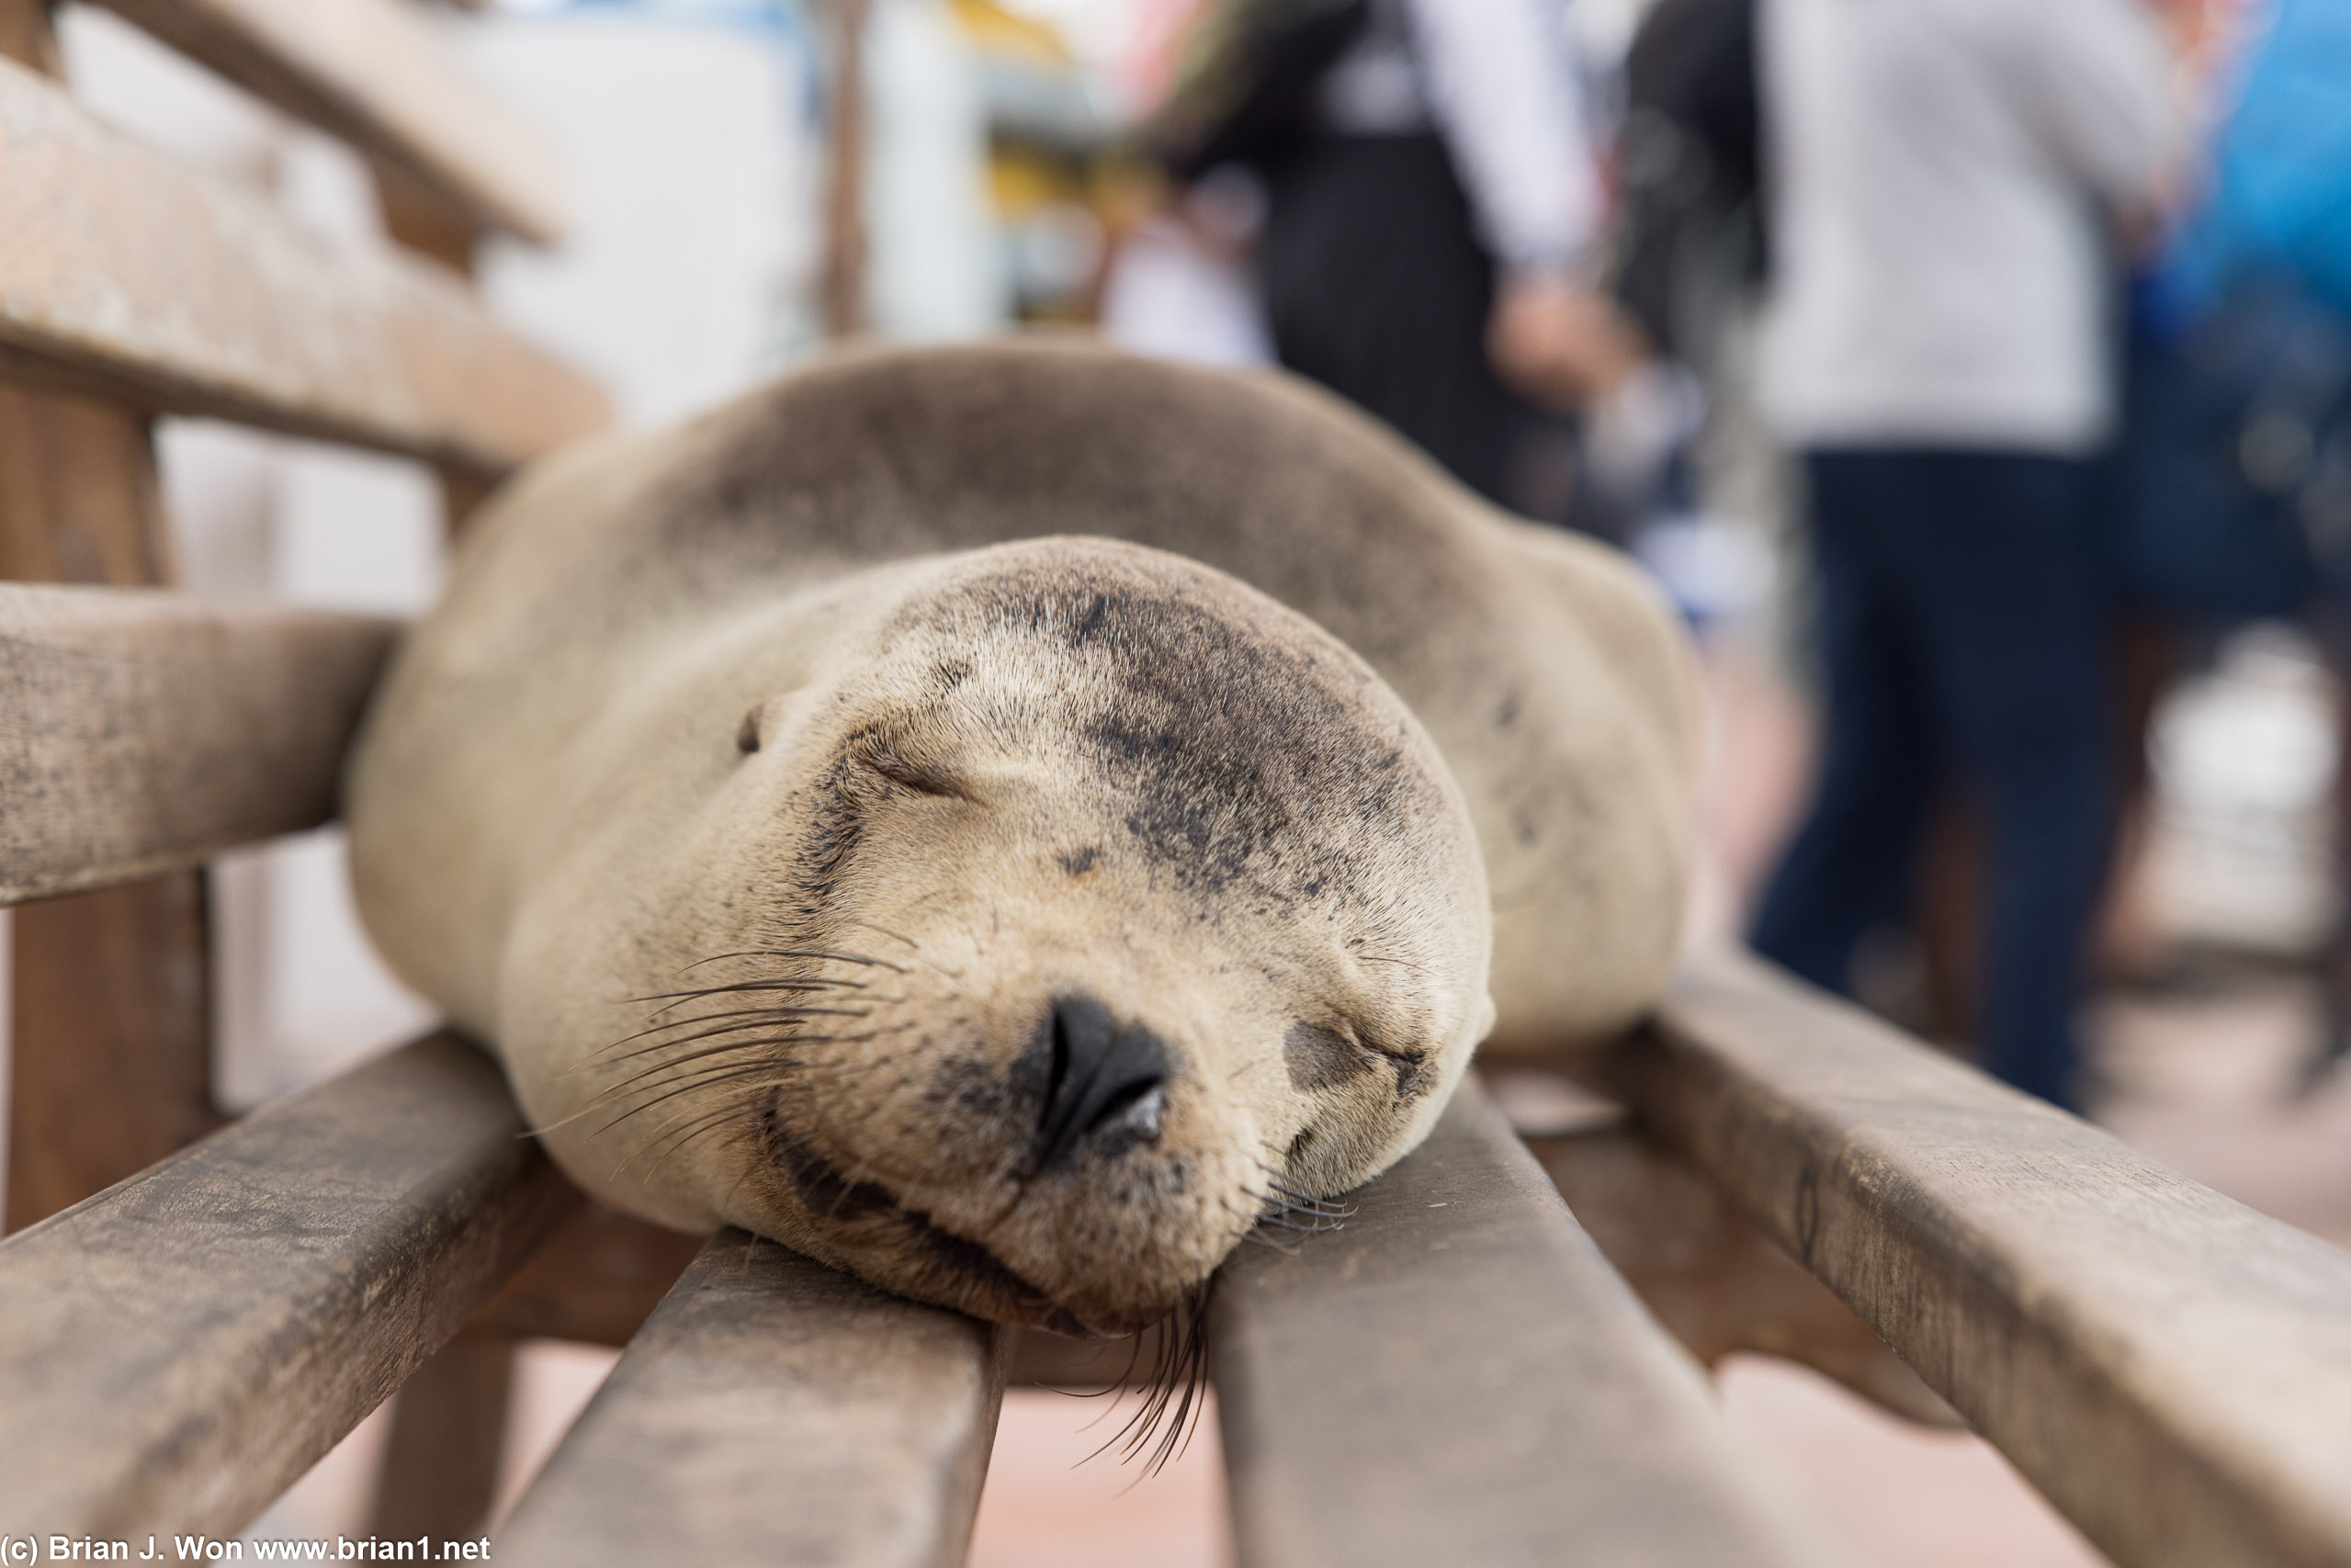 One of many sea lions sleeping on the benches at the dock.